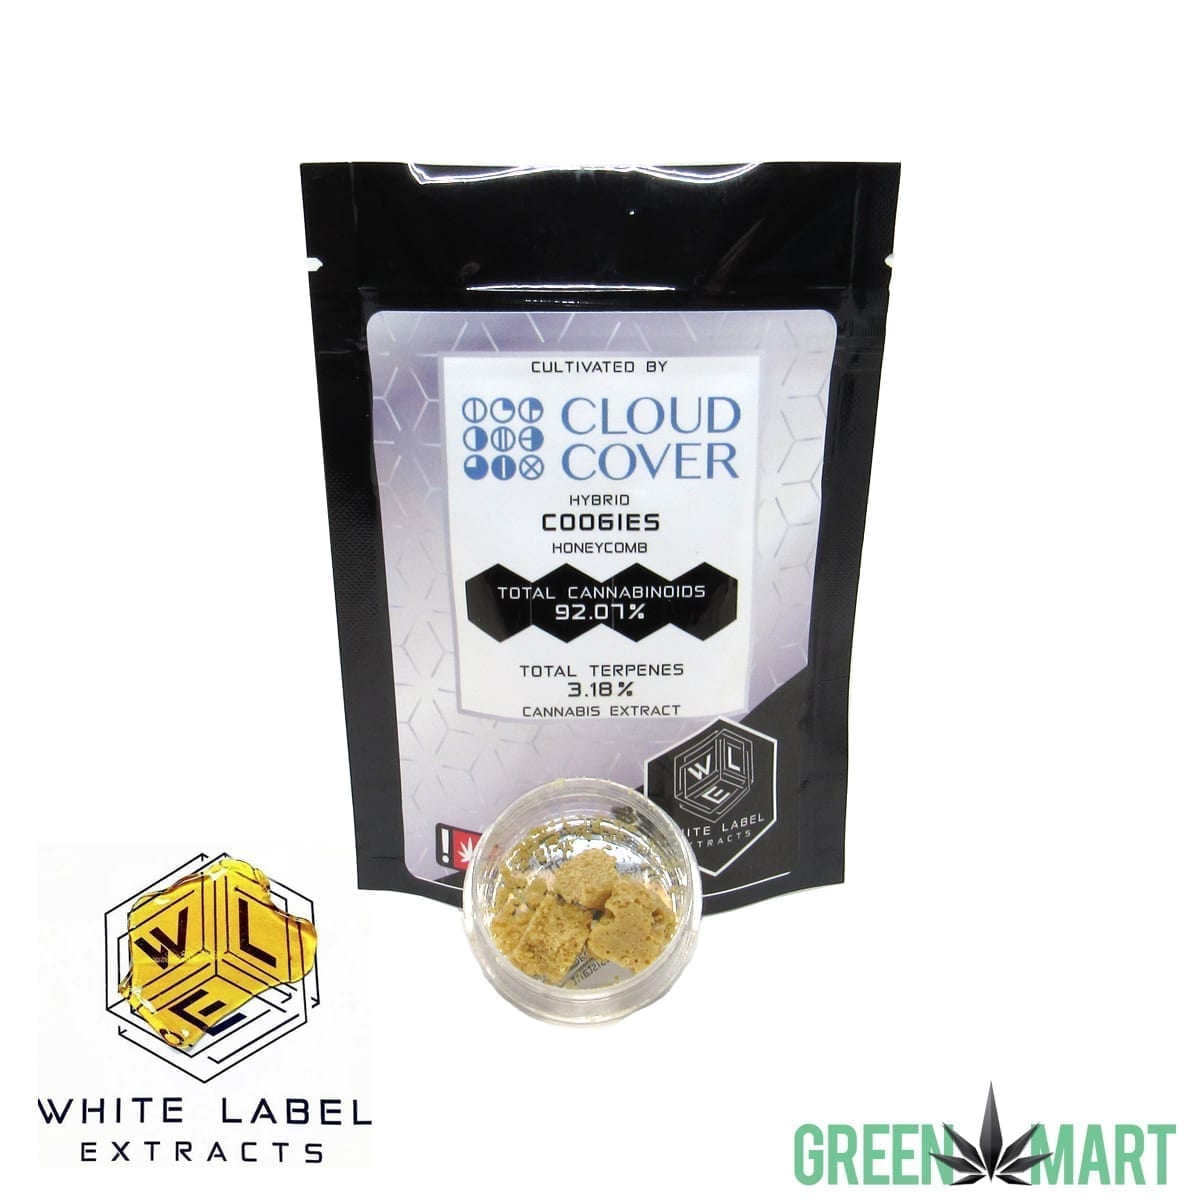 White Label Extracts - Coogies Honeycomb